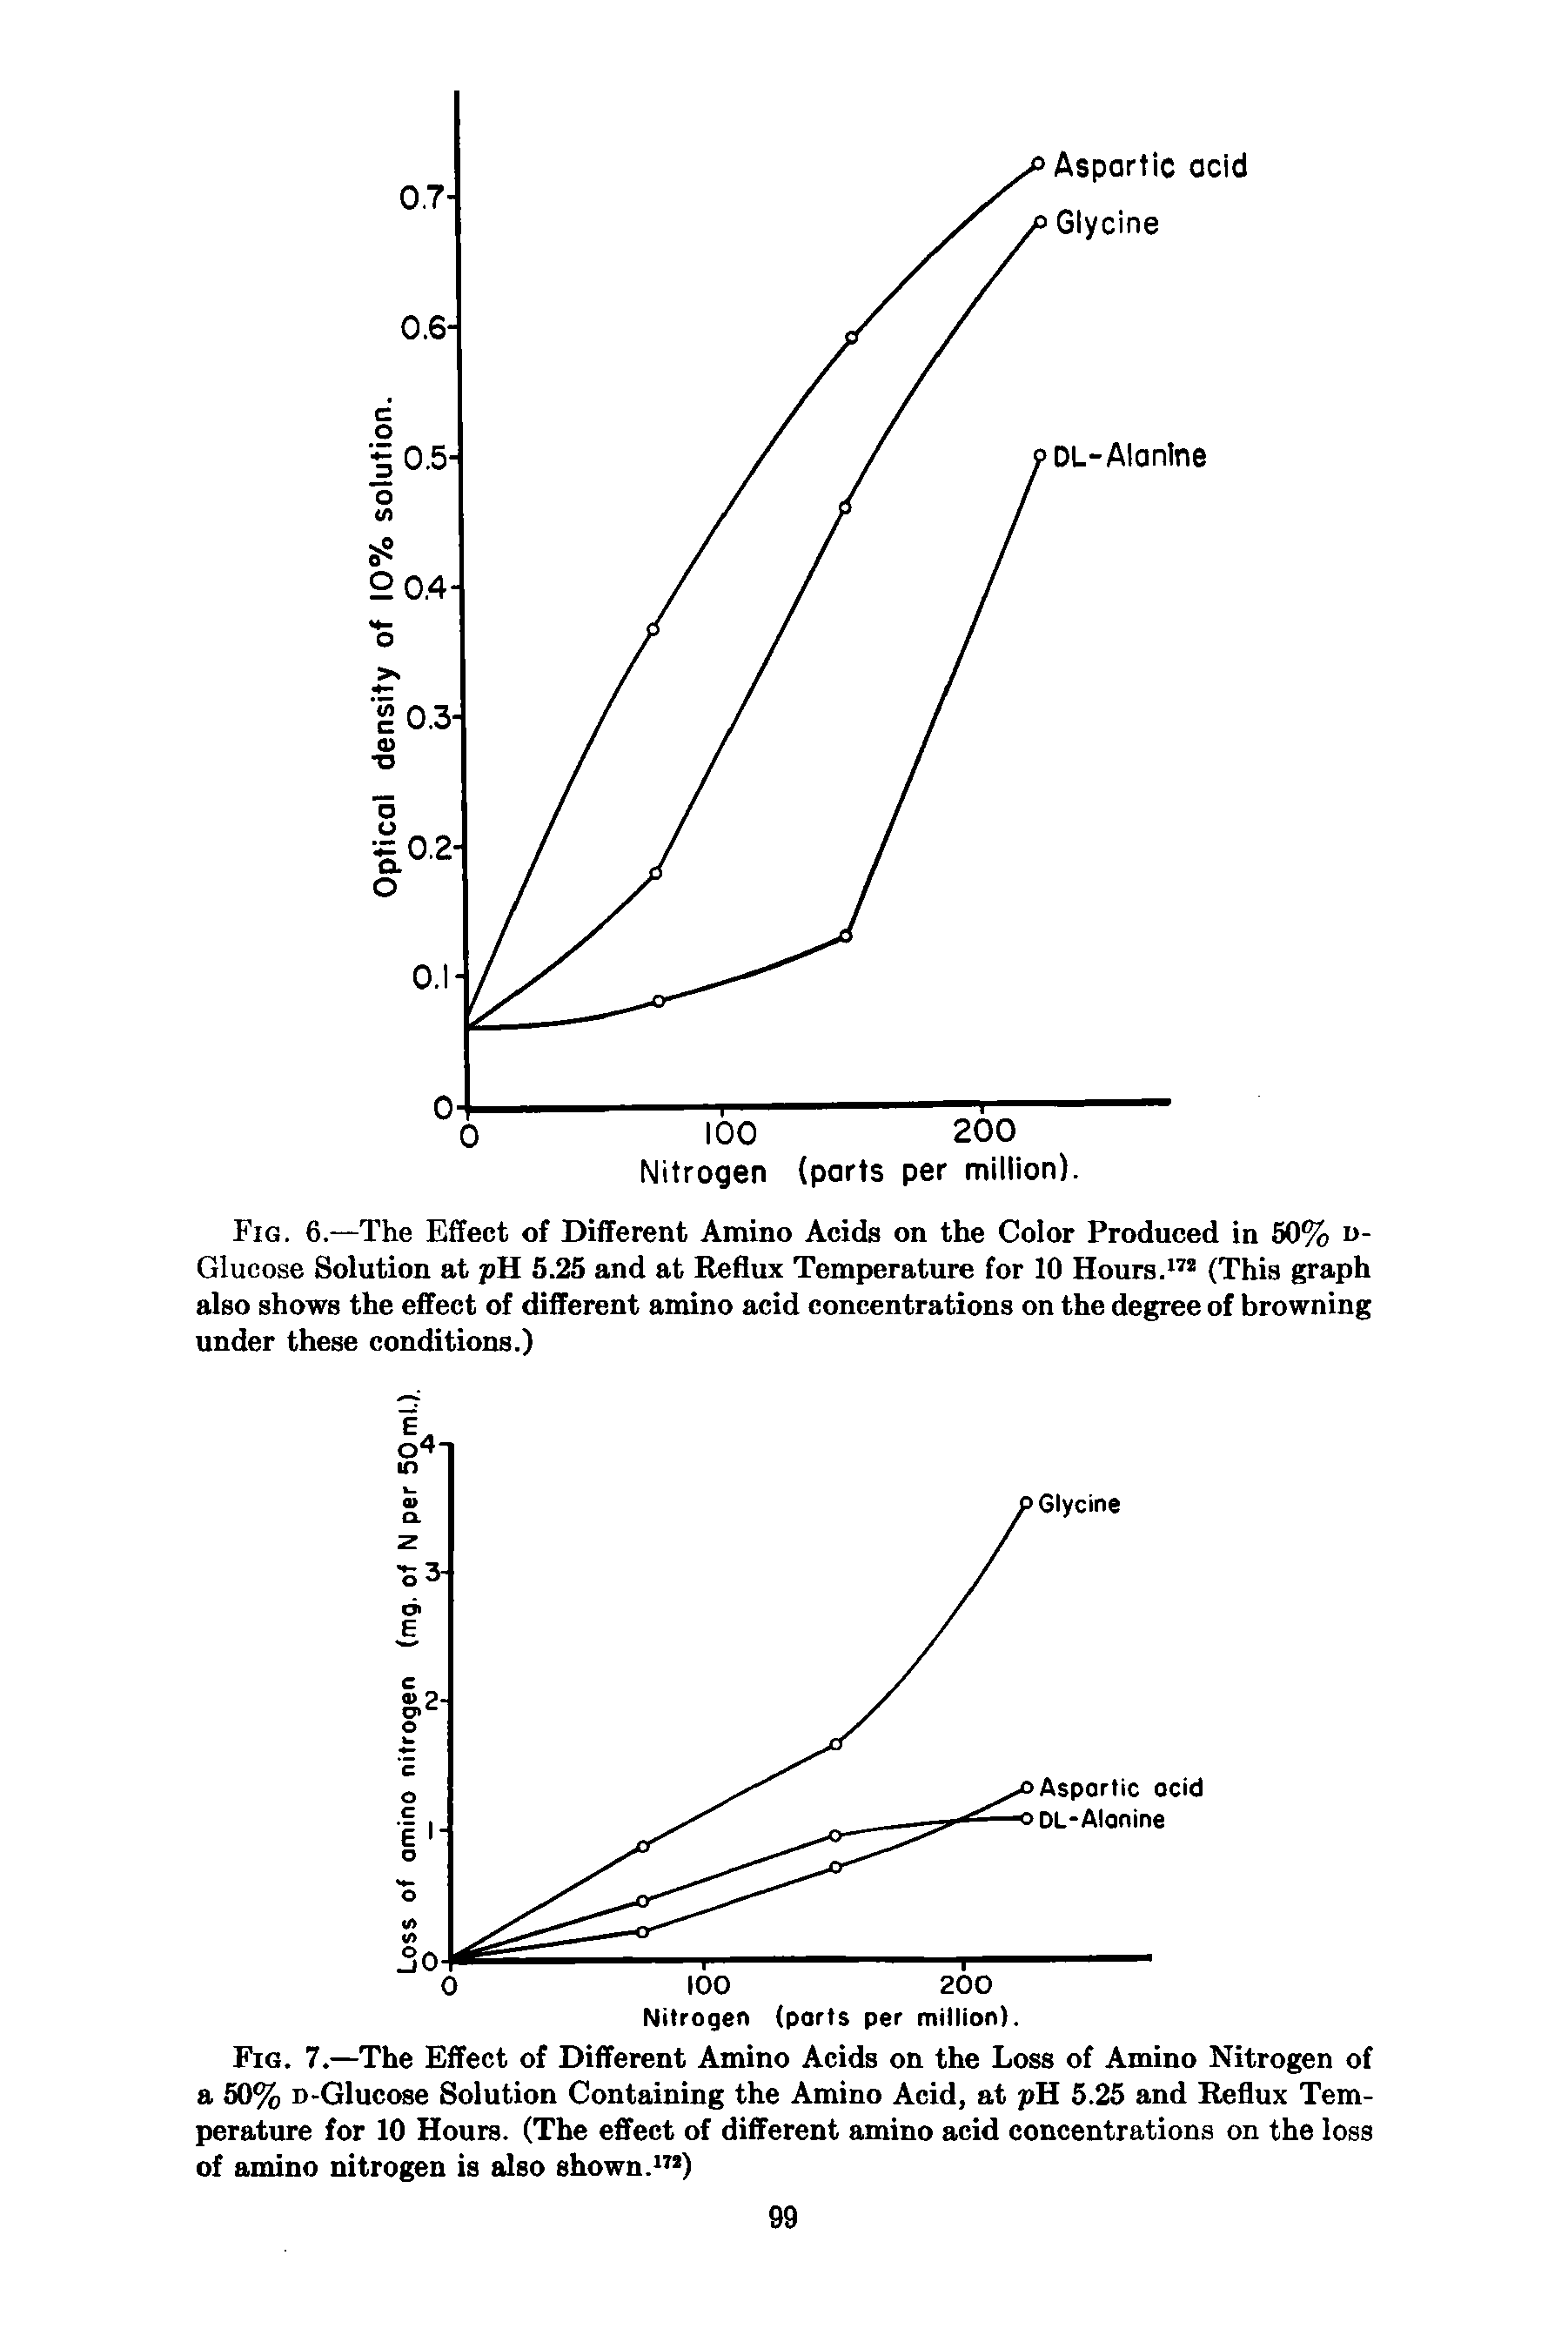 Fig. 7.—The Effect of Different Amino Acids on the Loss of Amino Nitrogen of a 50% D-Glucose Solution Containing the Amino Acid, at pH 5.25 and Reflux Temperature for 10 Hours. (The effect of different amino acid concentrations on the loss of amino nitrogen is also shown.17 )...